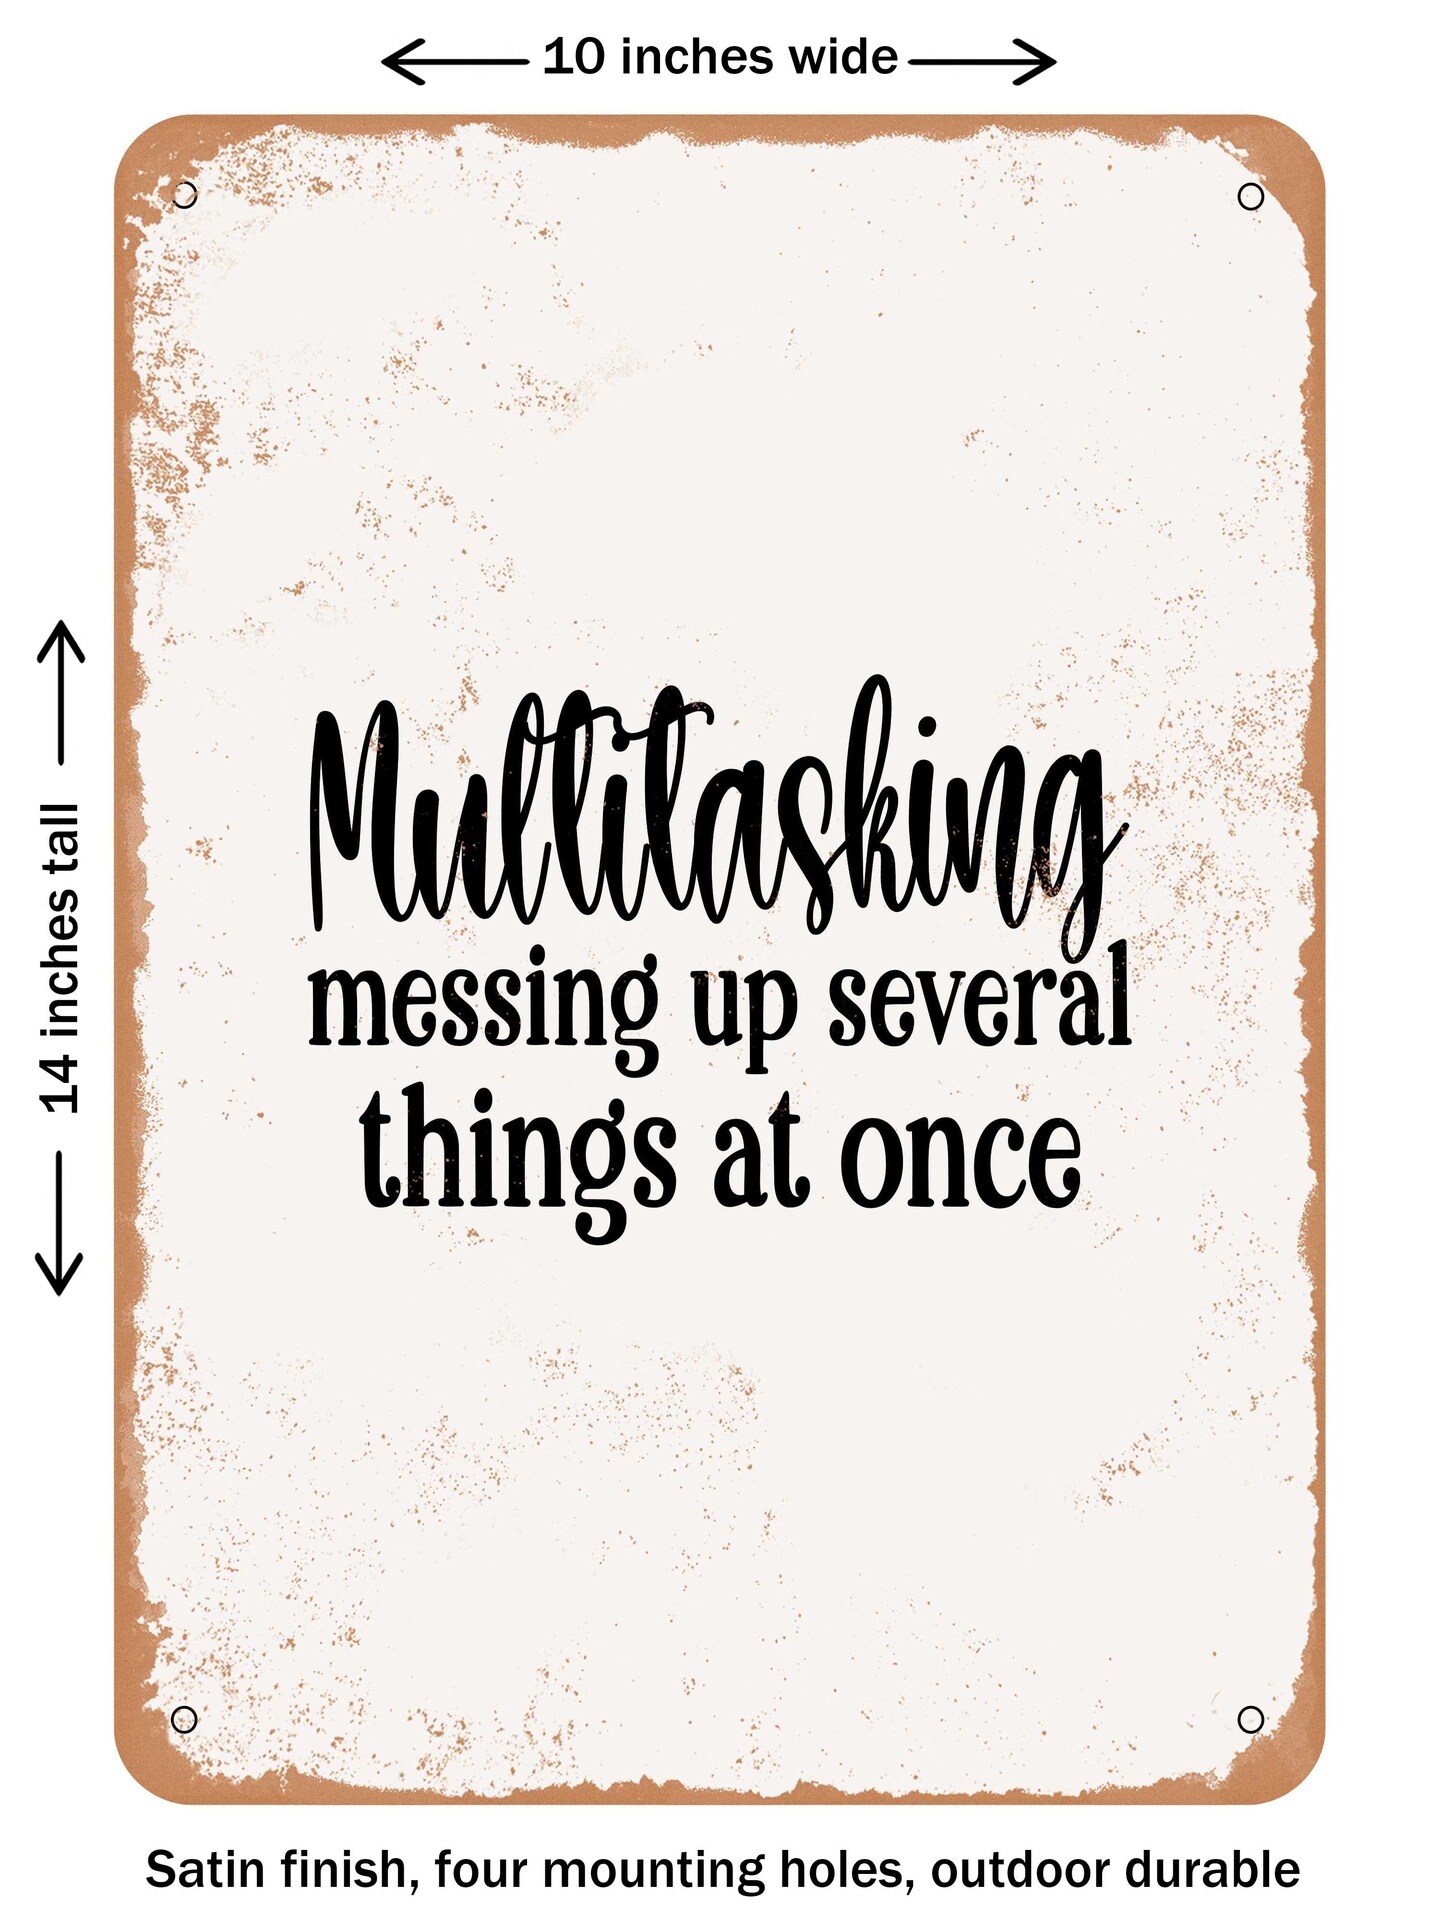 DECORATIVE METAL SIGN - Multitasking Messing Up Several Things At Once - Vintage Rusty Look